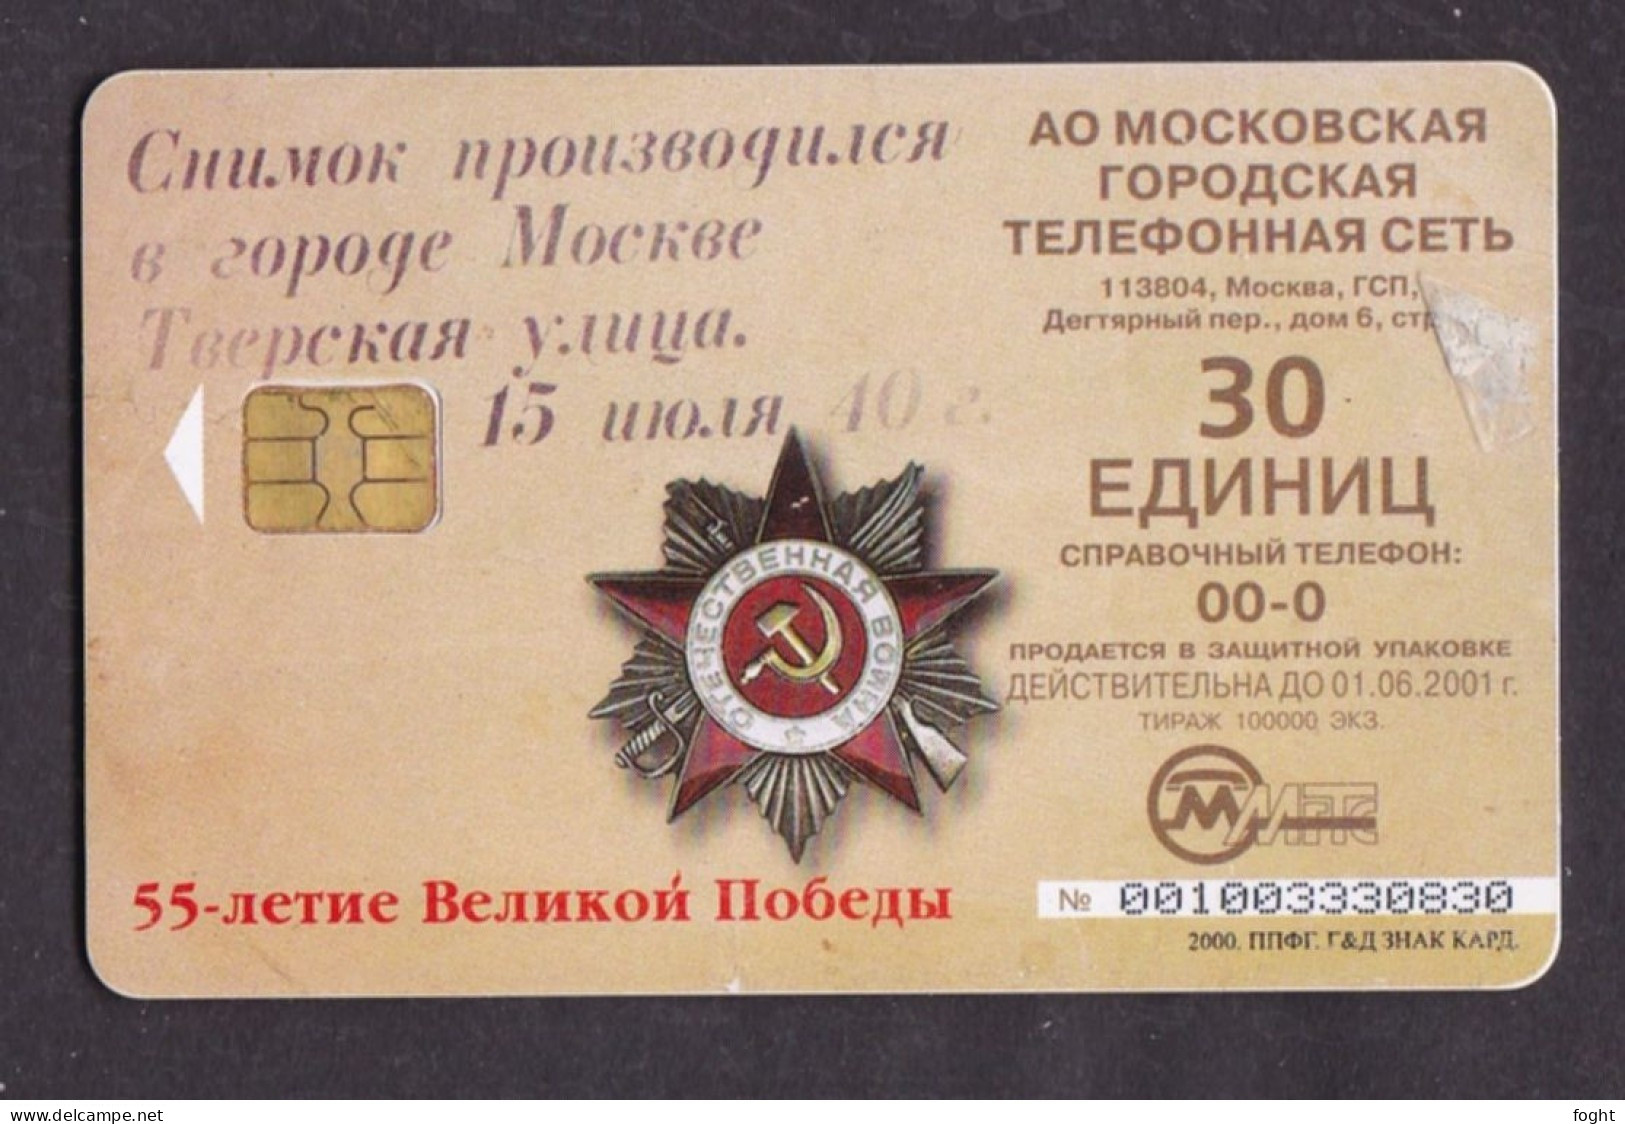 2000 Russia, Phonecard ›The Picture Was Made 15-07-1940,30 Units,Col:RU-MG-TS-0069 - Rusland